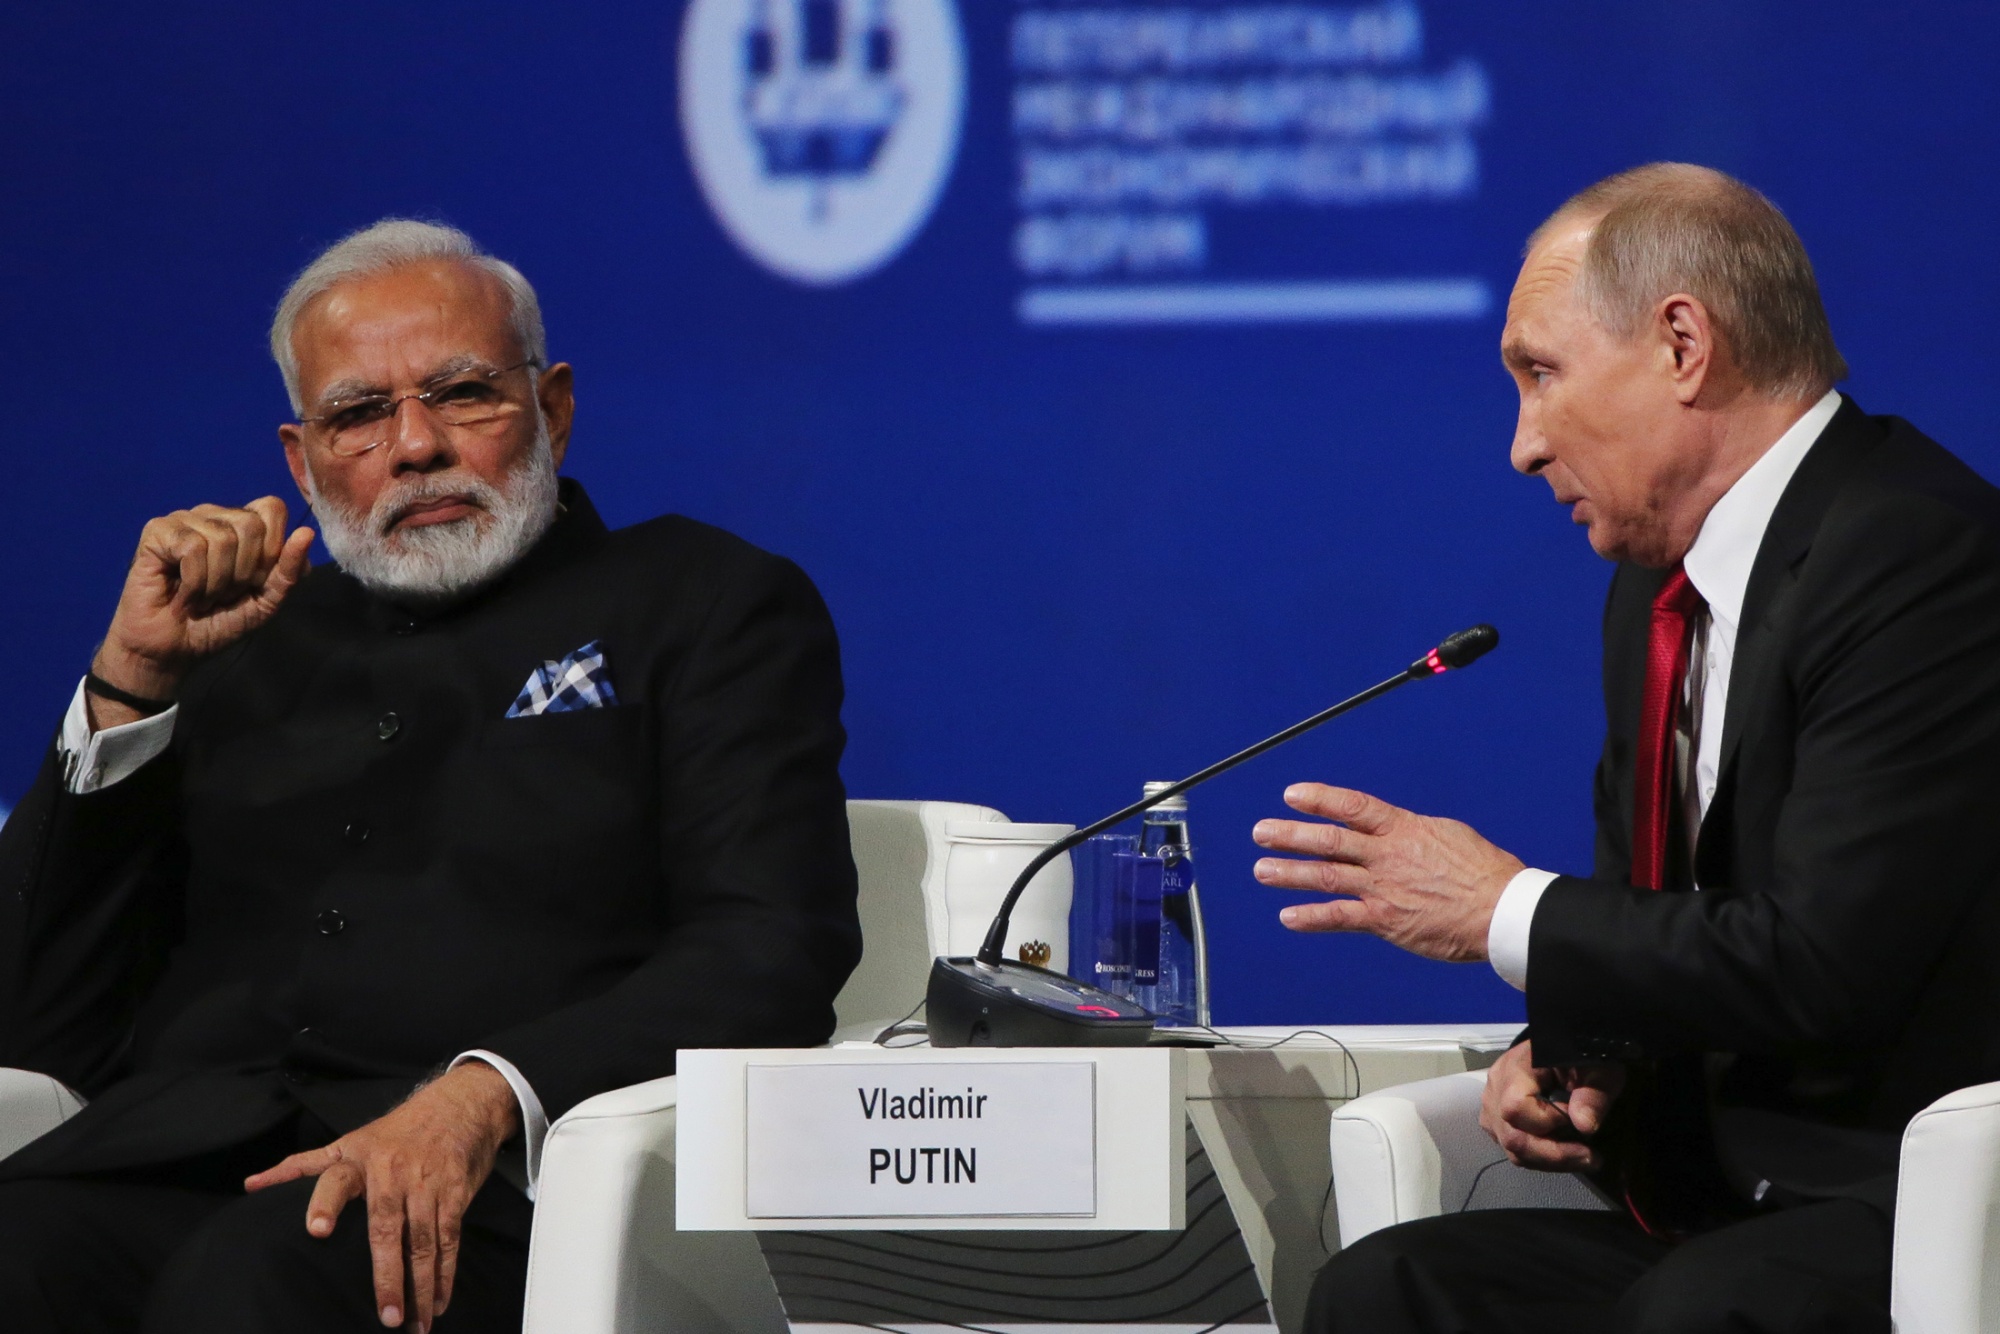 Modi Is Shoring Up Russia Ties as Putin Deepens China Embrace - Bloomberg